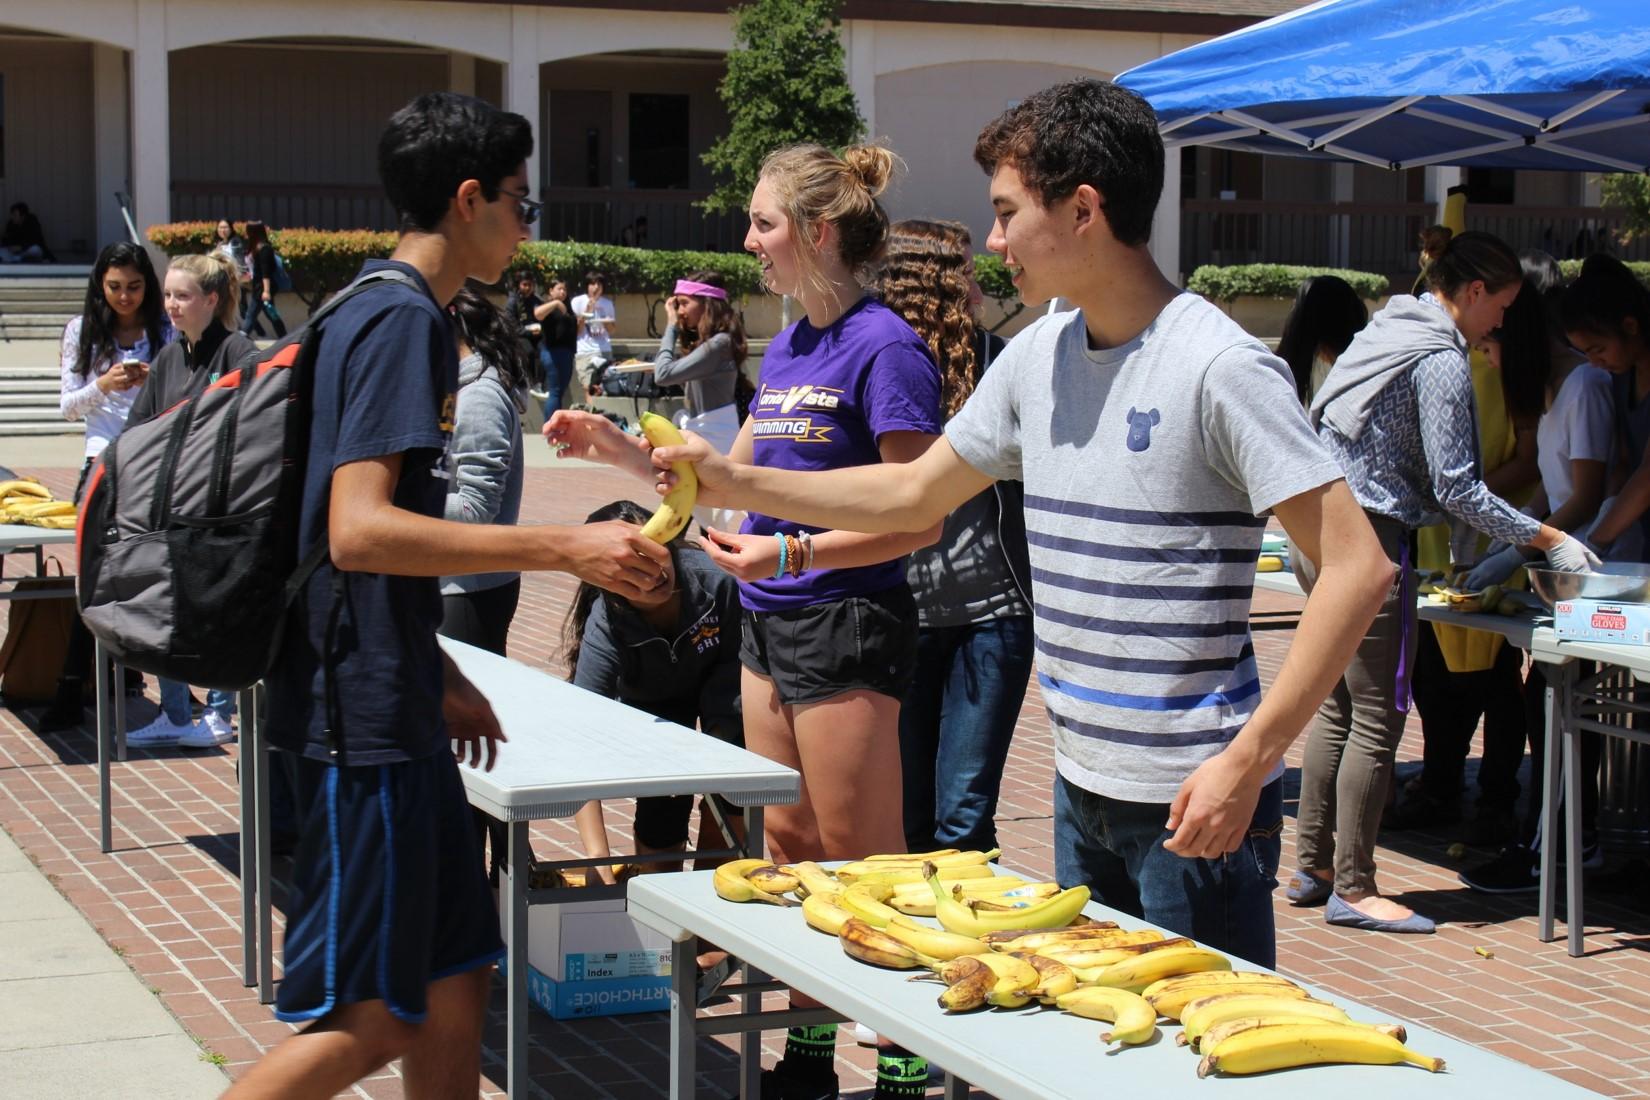 Junior Alex Maertens helped out with the event.The bananas he was collecting from participating students quickly built up as more and more people arrived.